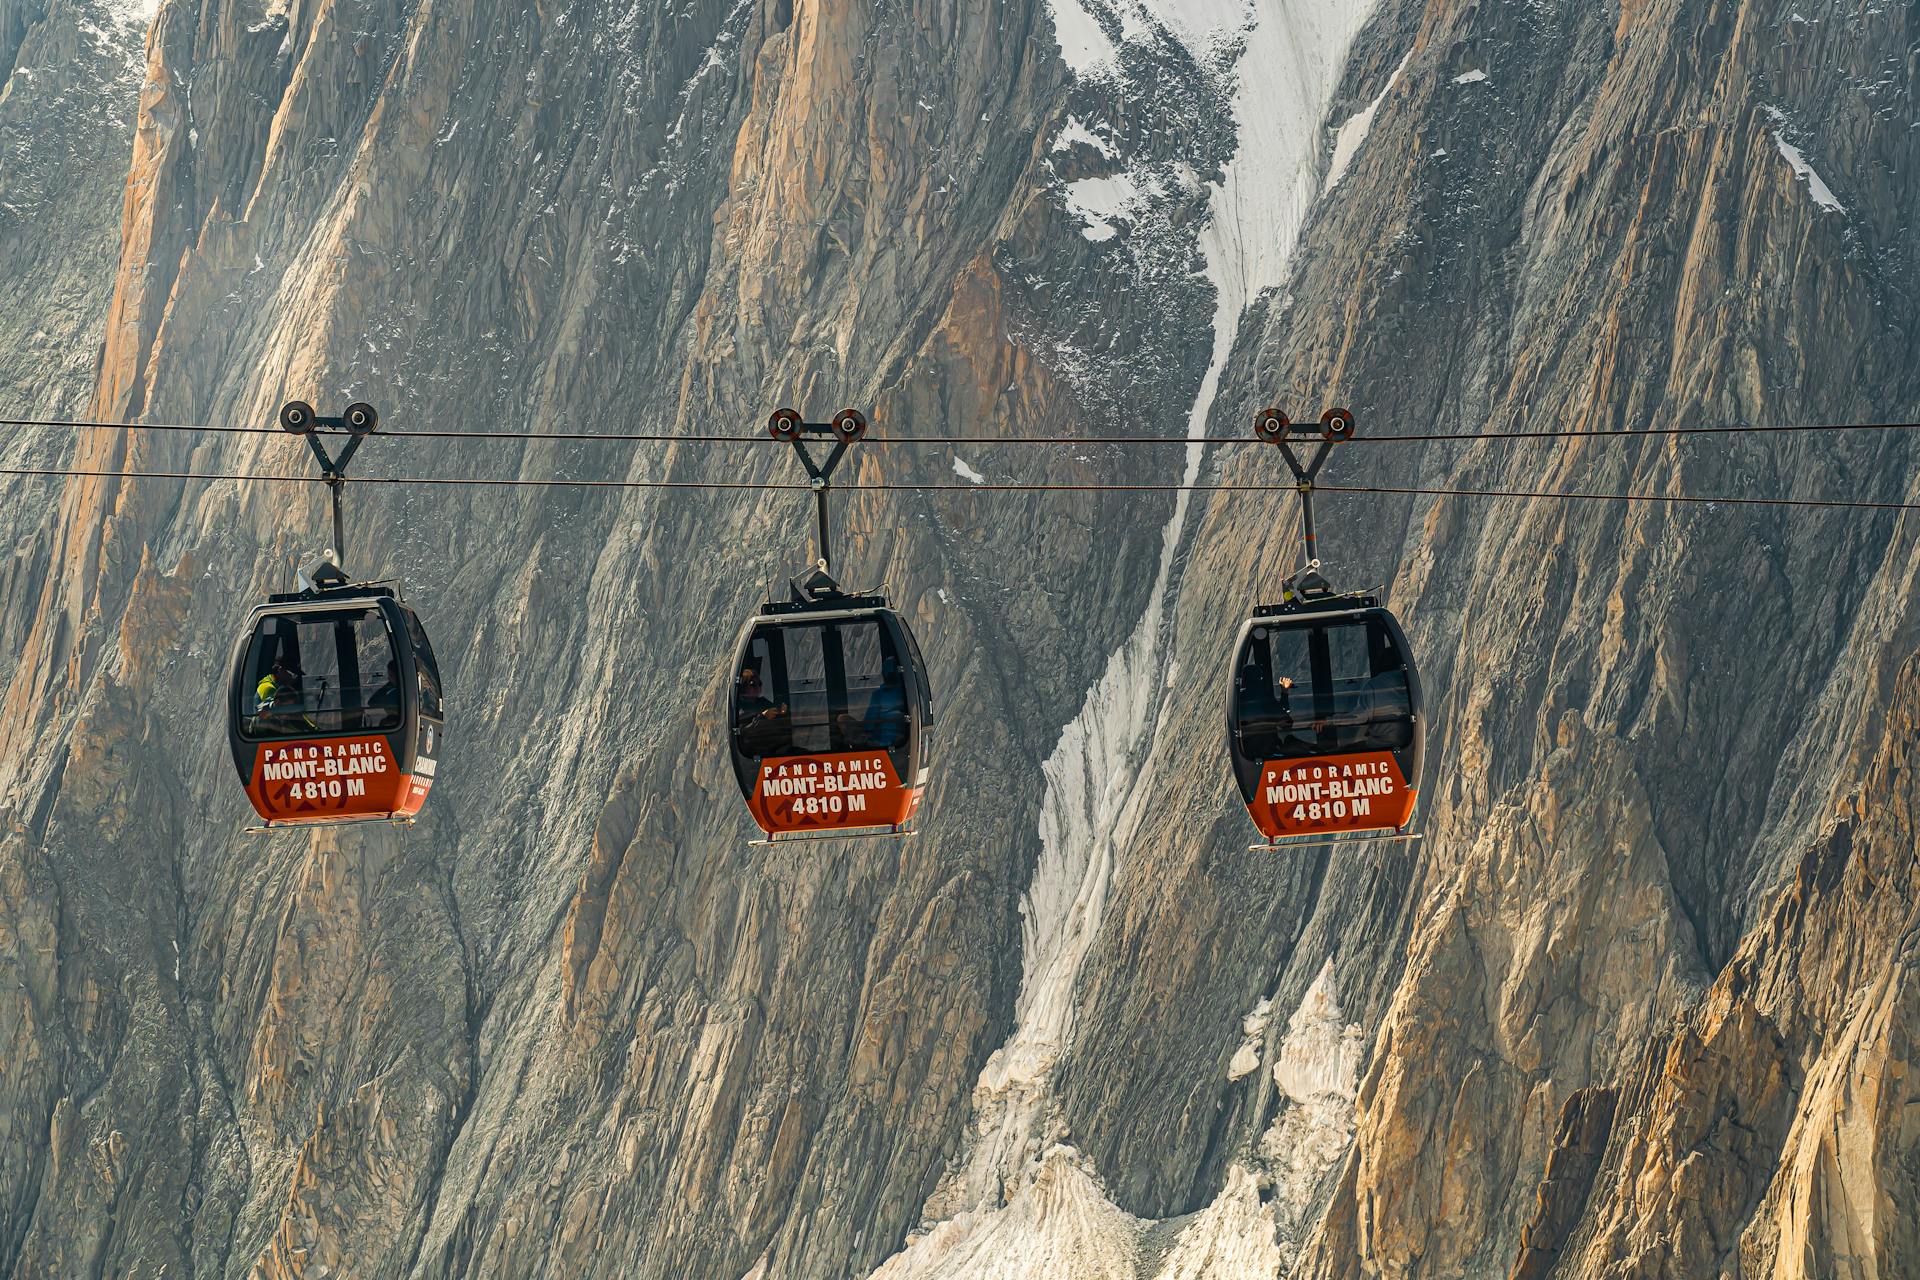 Red and Black Cable Cars